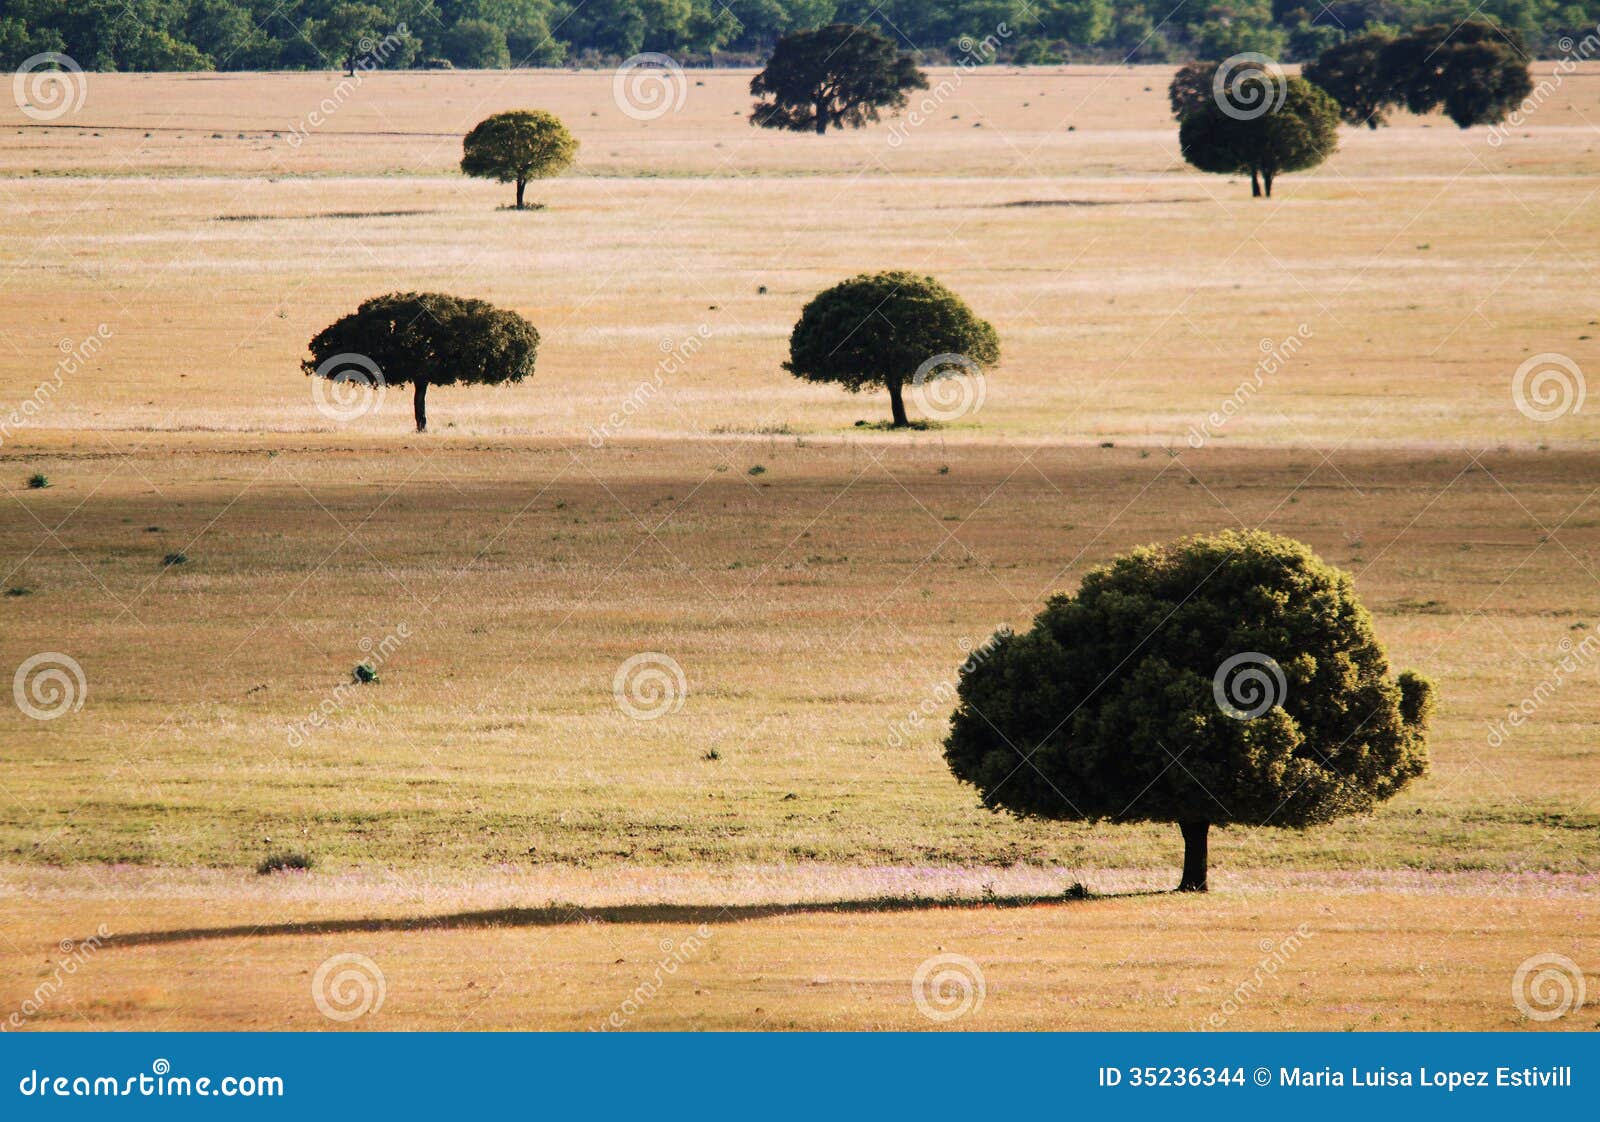 trees in the grassland in cabaÃÂ±eros